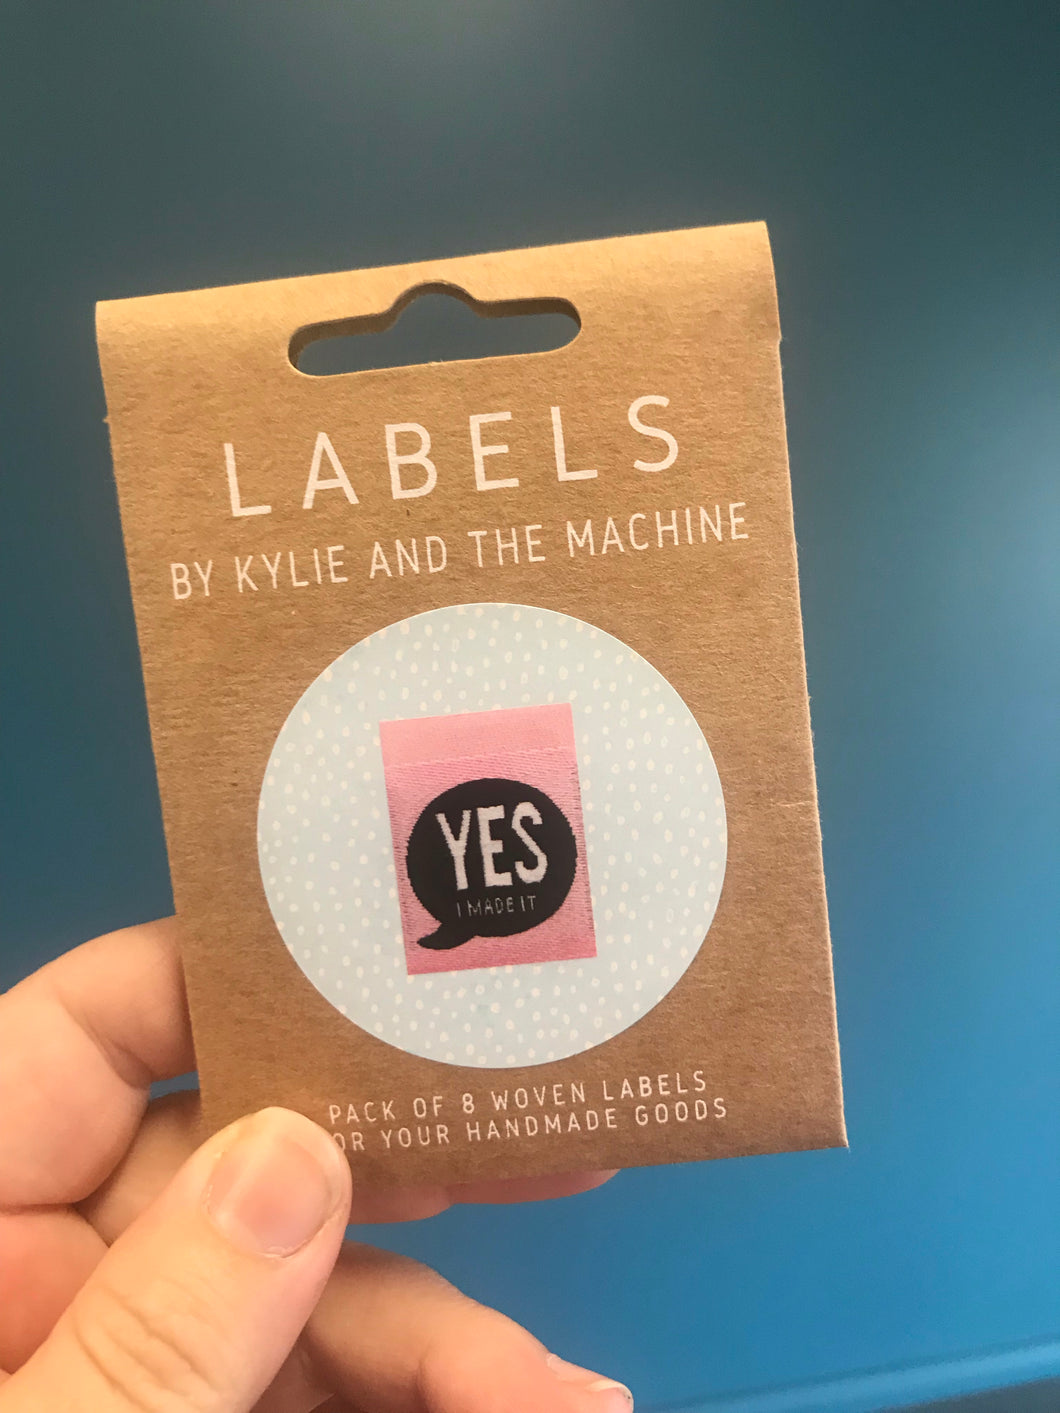 ‘Yes, I made it’ woven label